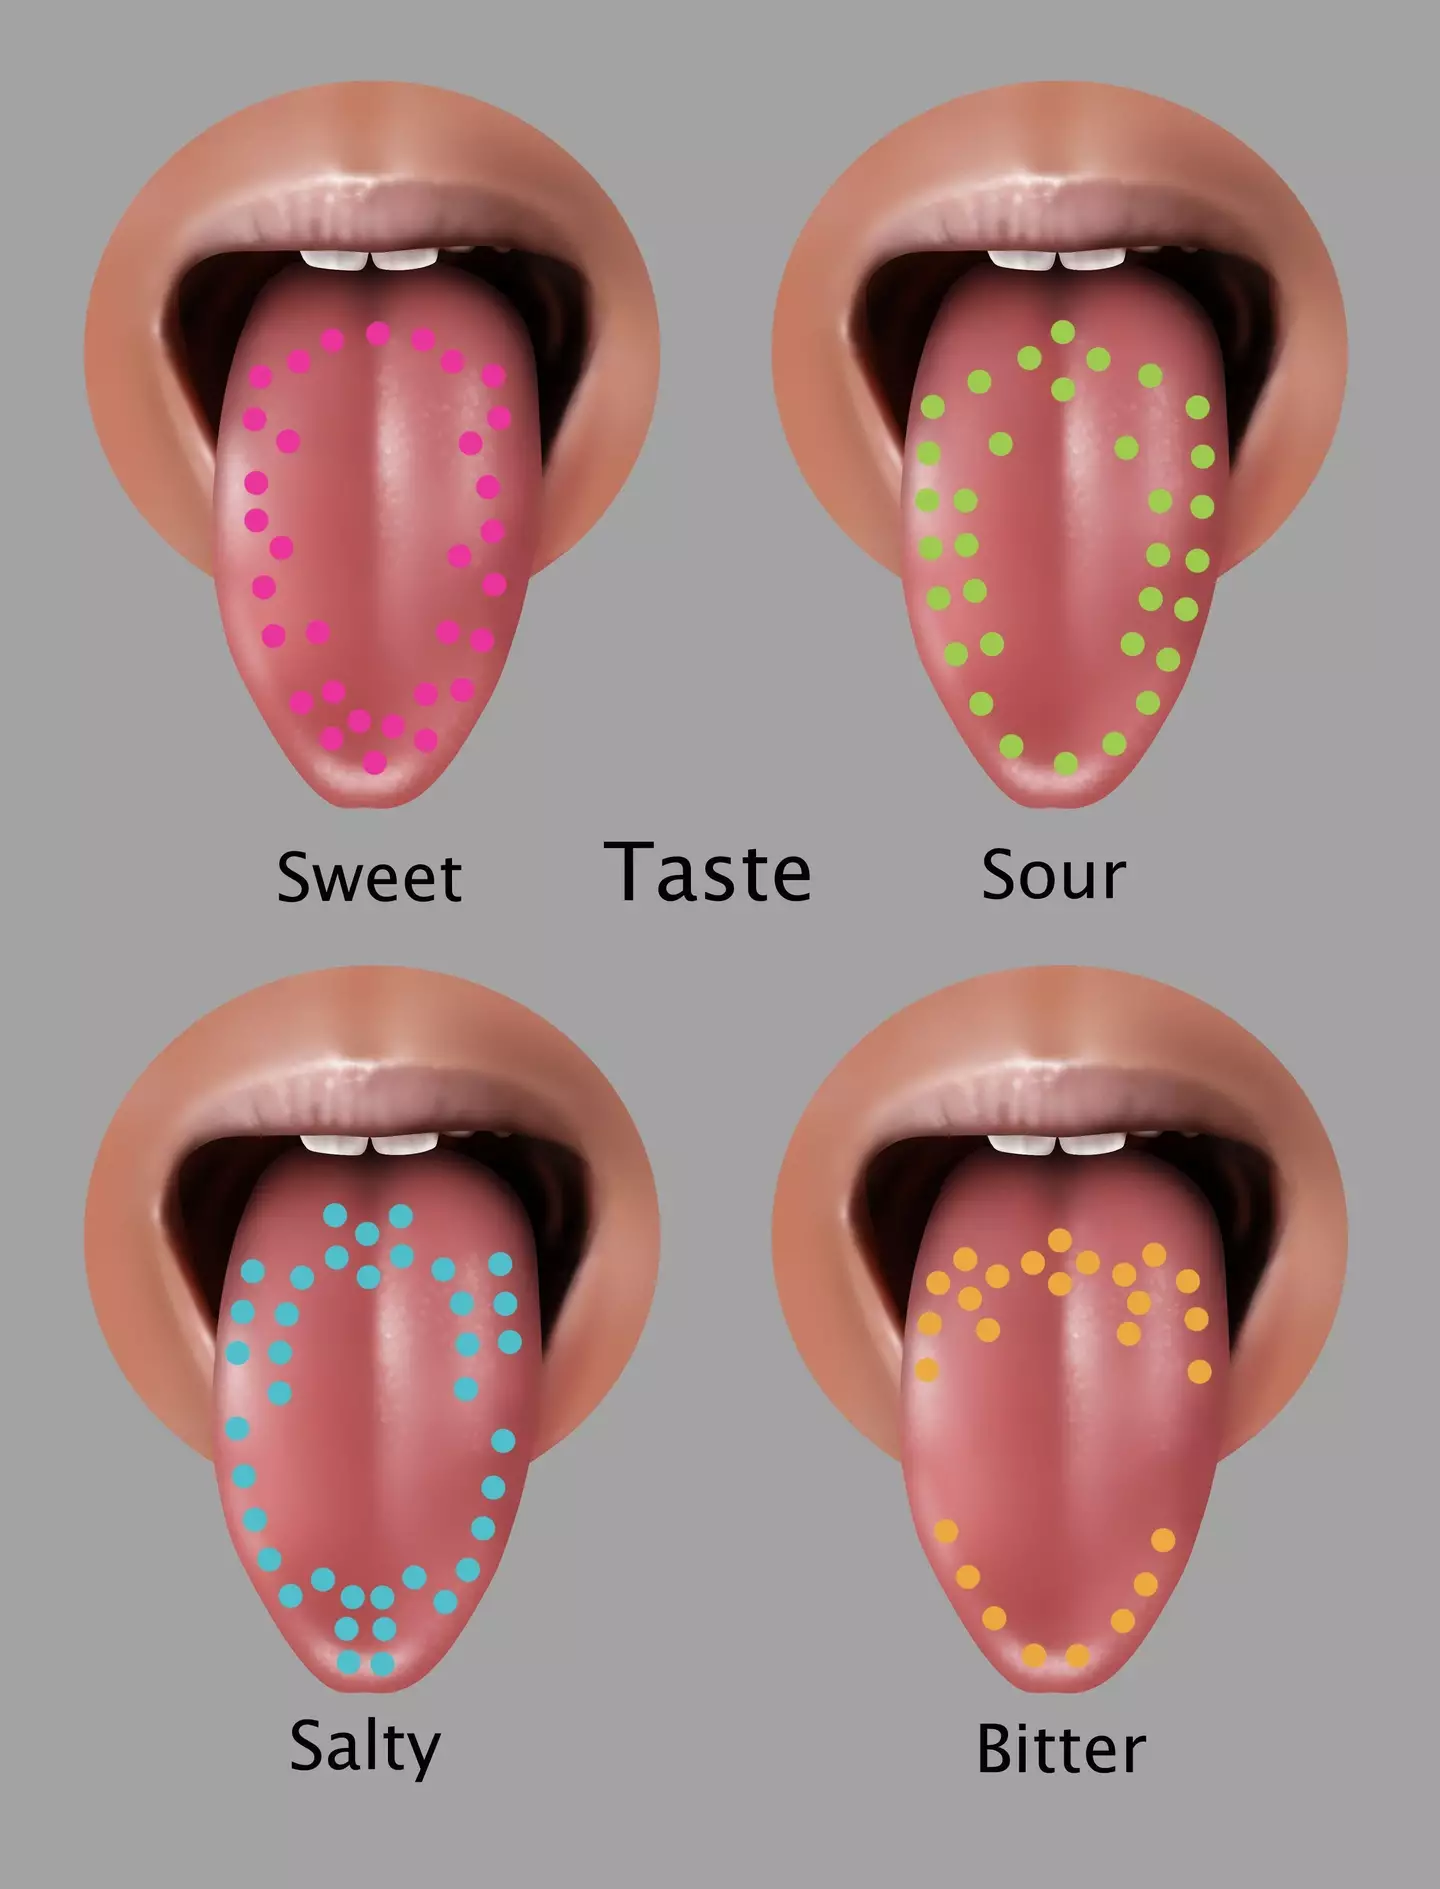 The tongue map theory dates back to the 1940s.